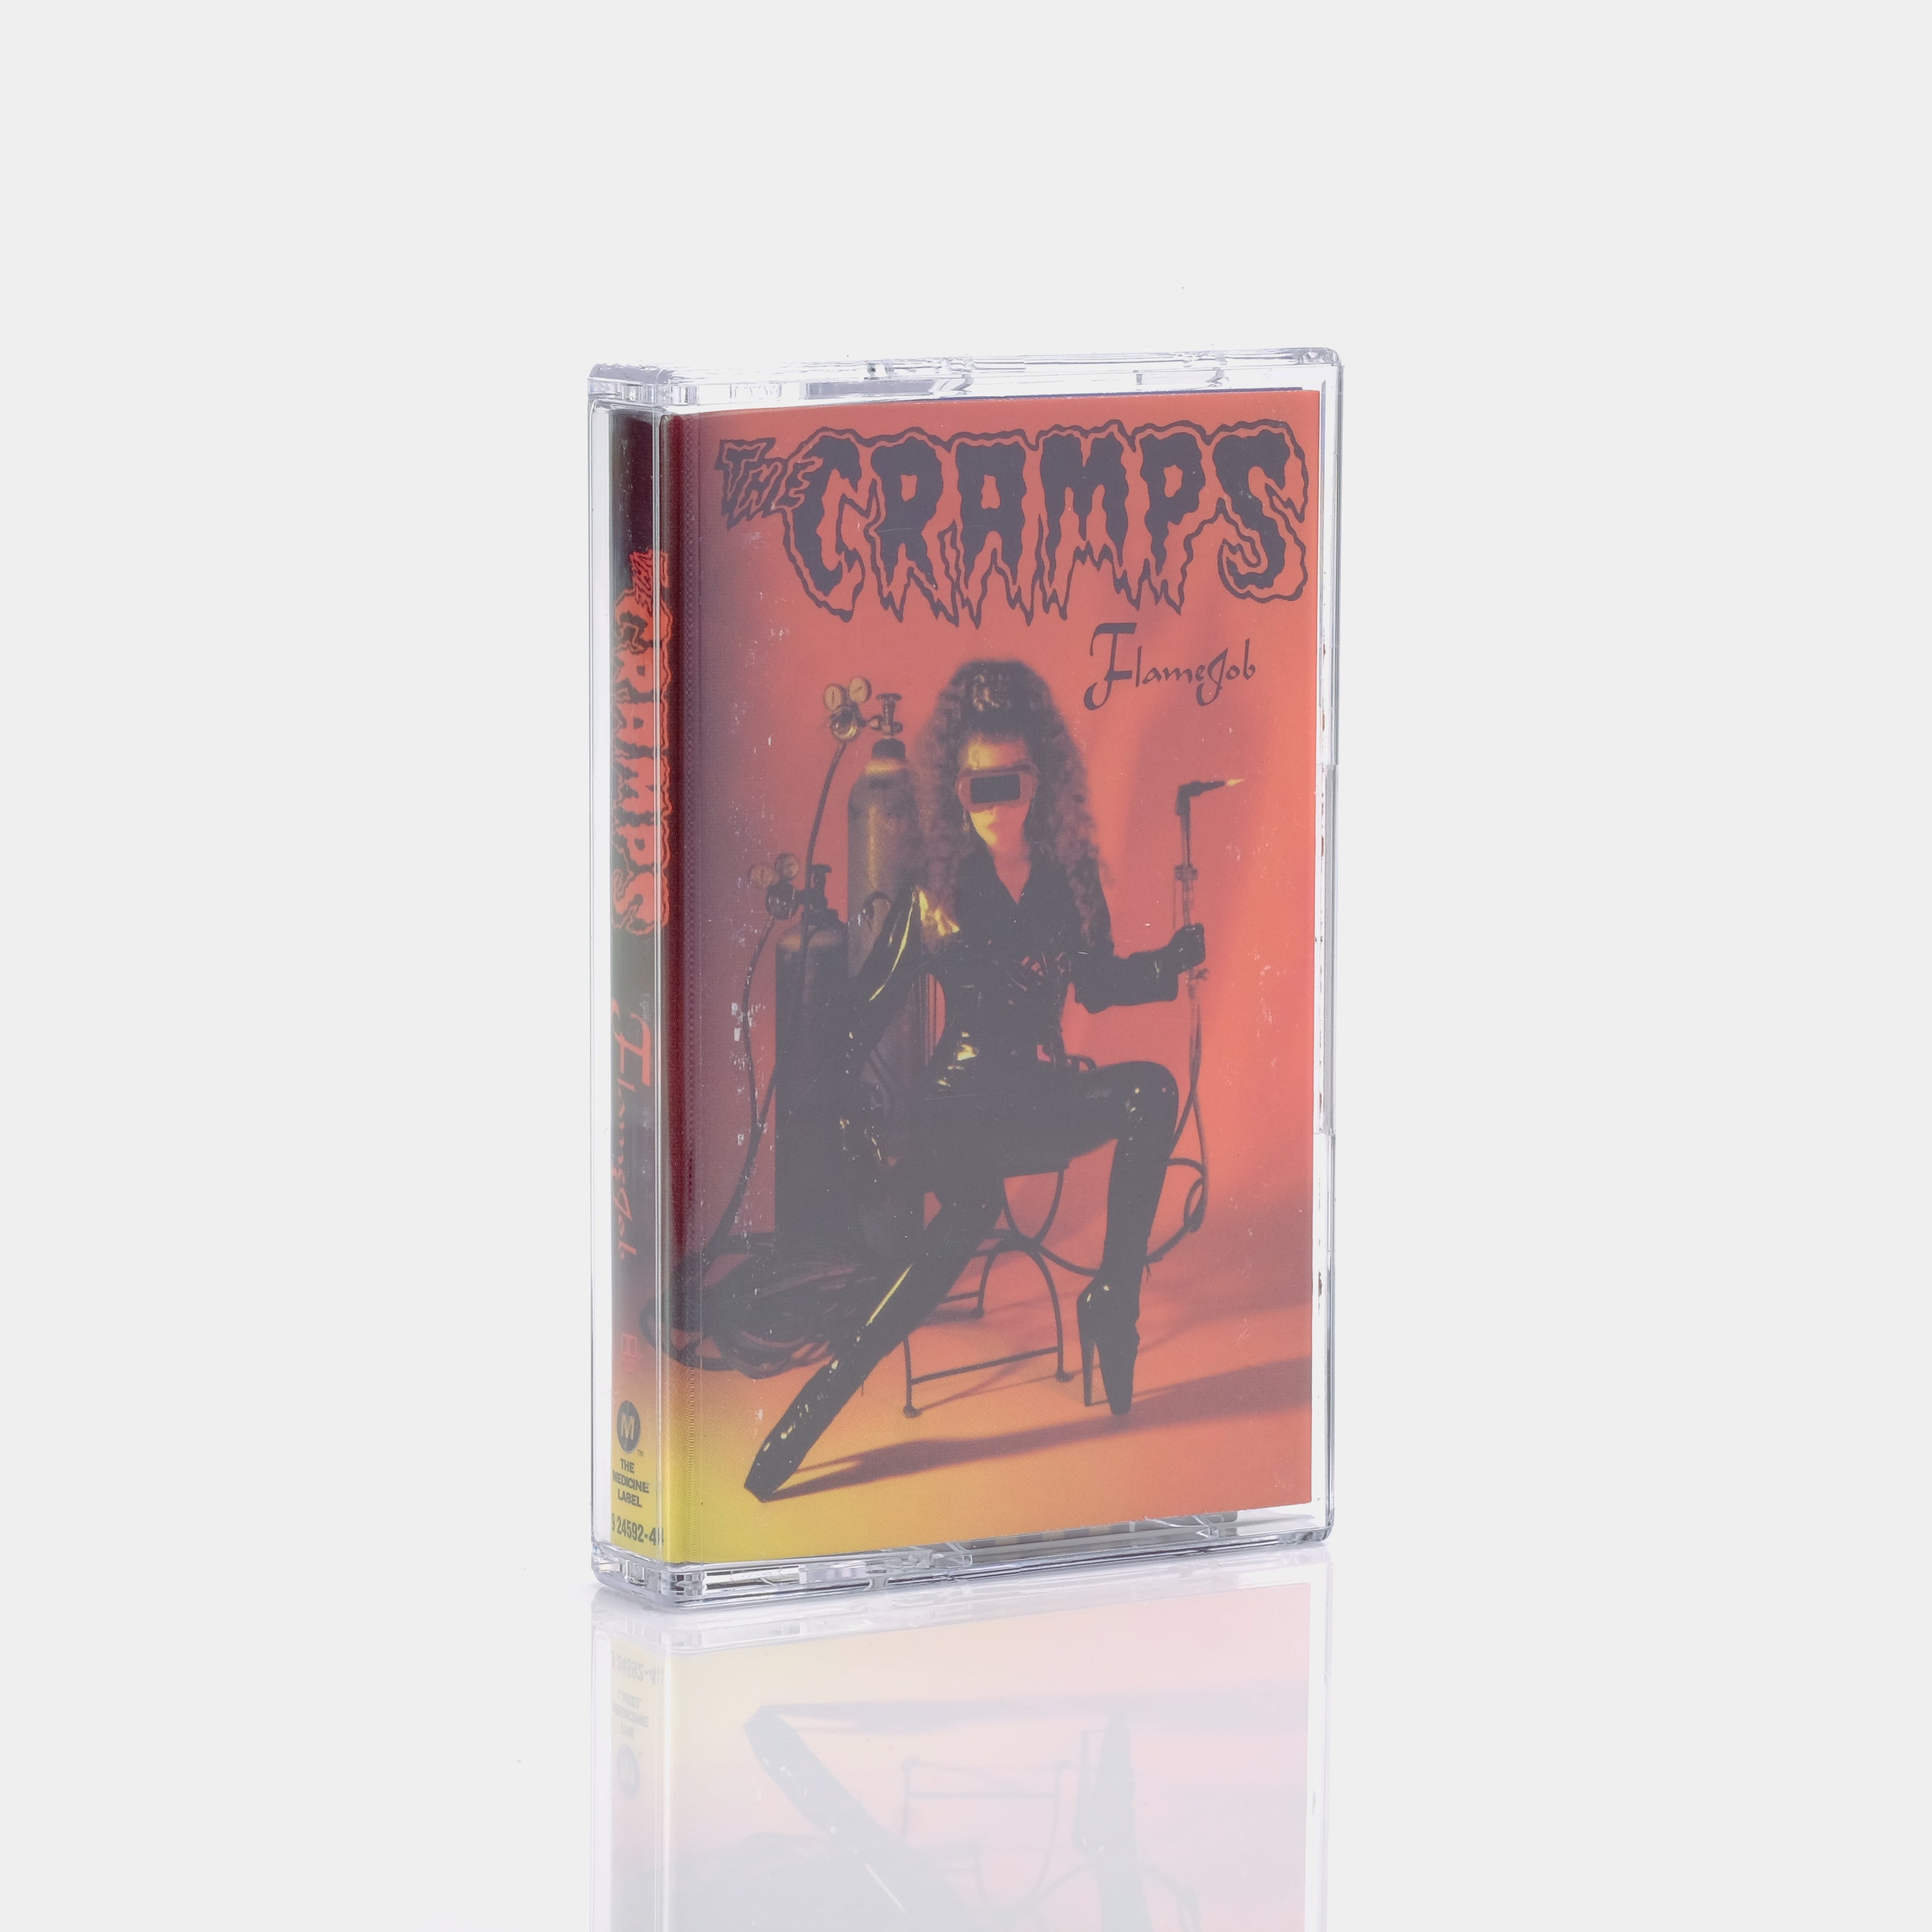 The Cramps - Flamejob Cassette Tape